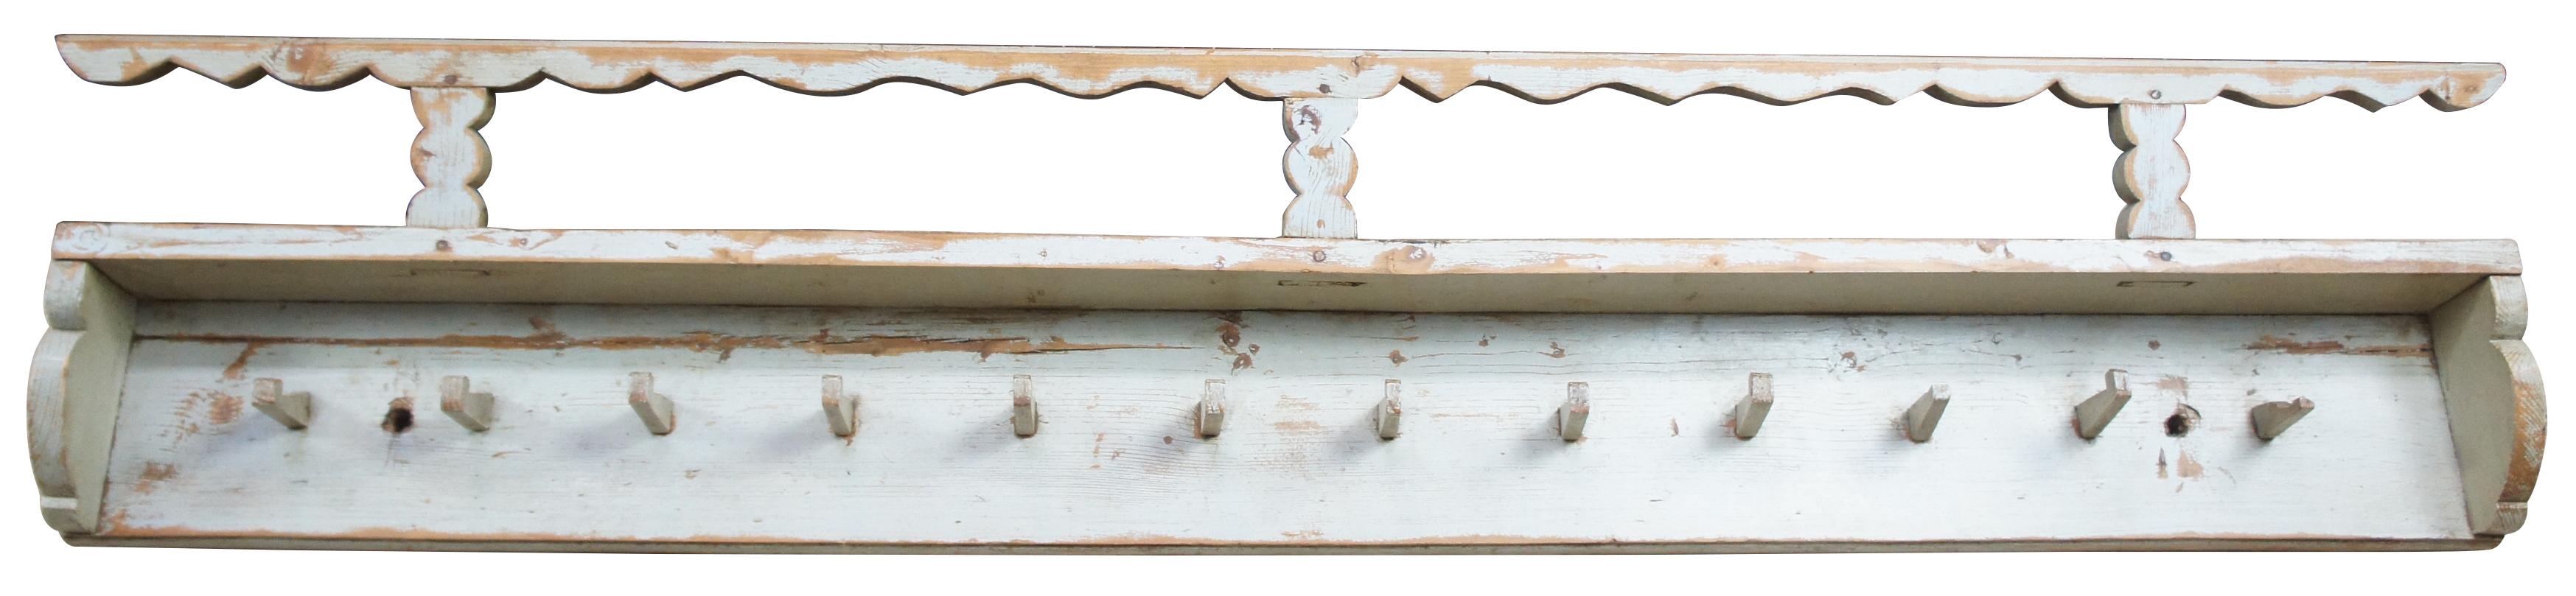 Late 19th century Romanian wall shelf. Often used in European country homes to display plates, cups or kitchen ware. Features three grooves along the top and twelve pegs. This would make a wonderful hanging rack in any mudroom, bathroom, hallway,